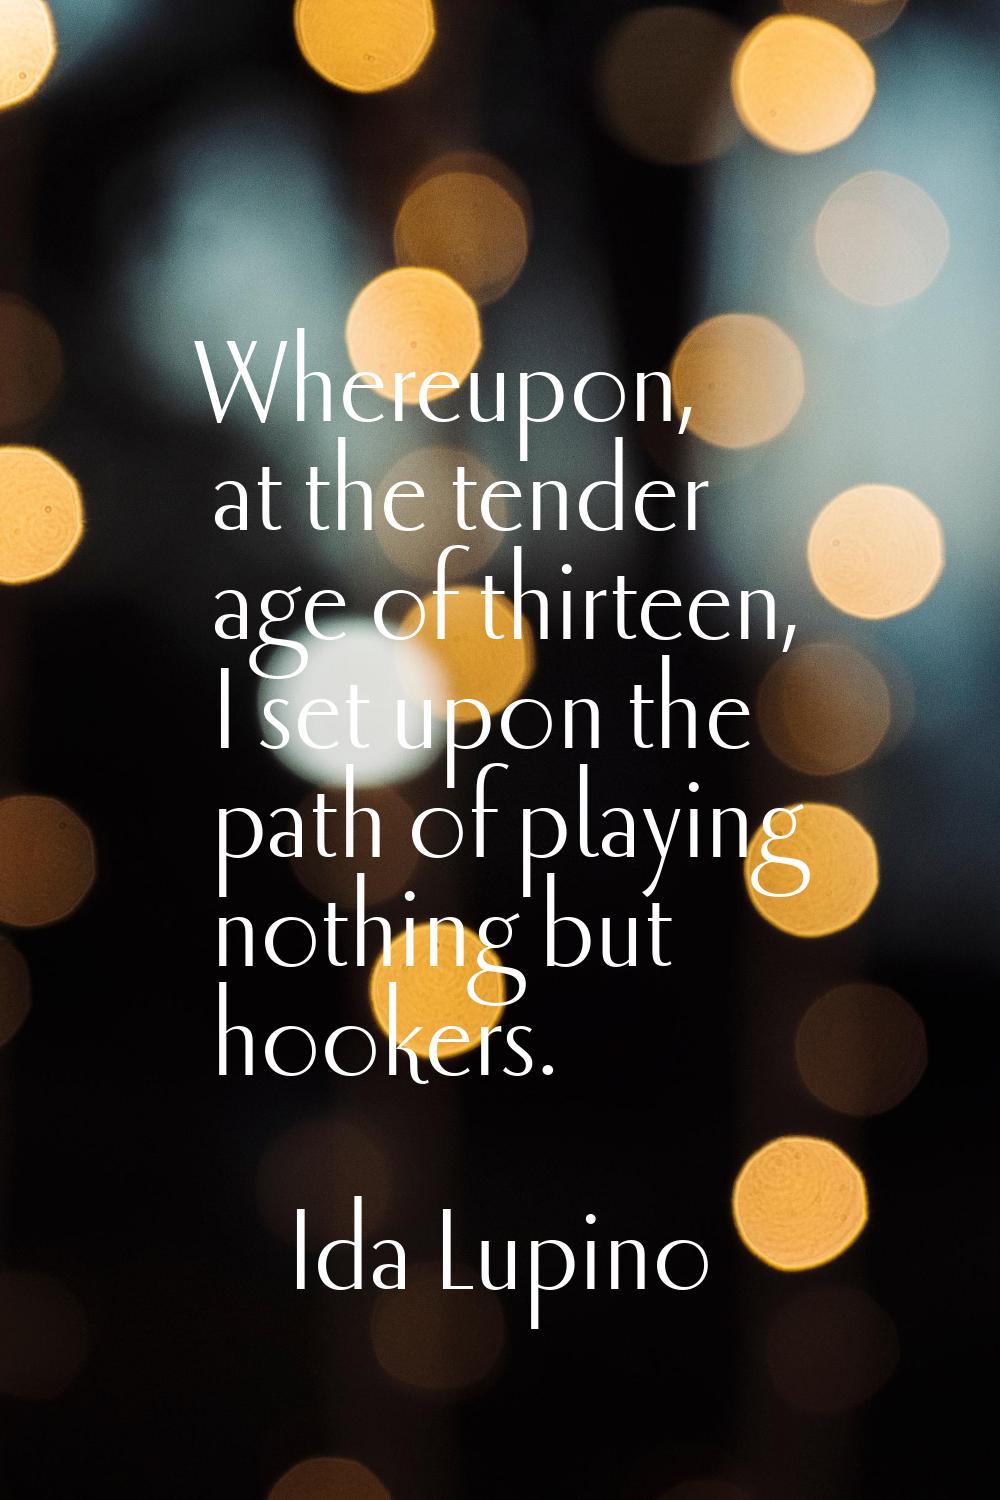 Whereupon, at the tender age of thirteen, I set upon the path of playing nothing but hookers.